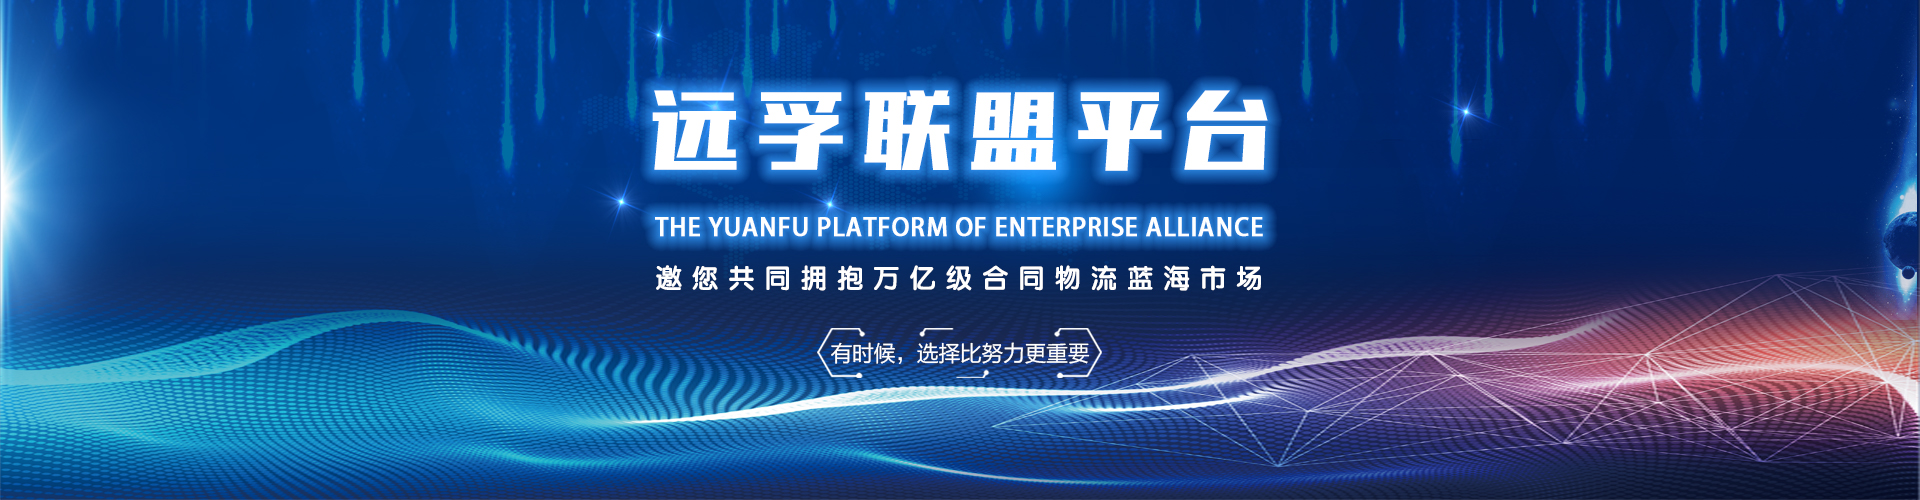 Supply Chain Service_Yuanfu Logistics Group Co.,Ltd.—Serving our customer to focus on core business,win-win on the supply chain【official website】